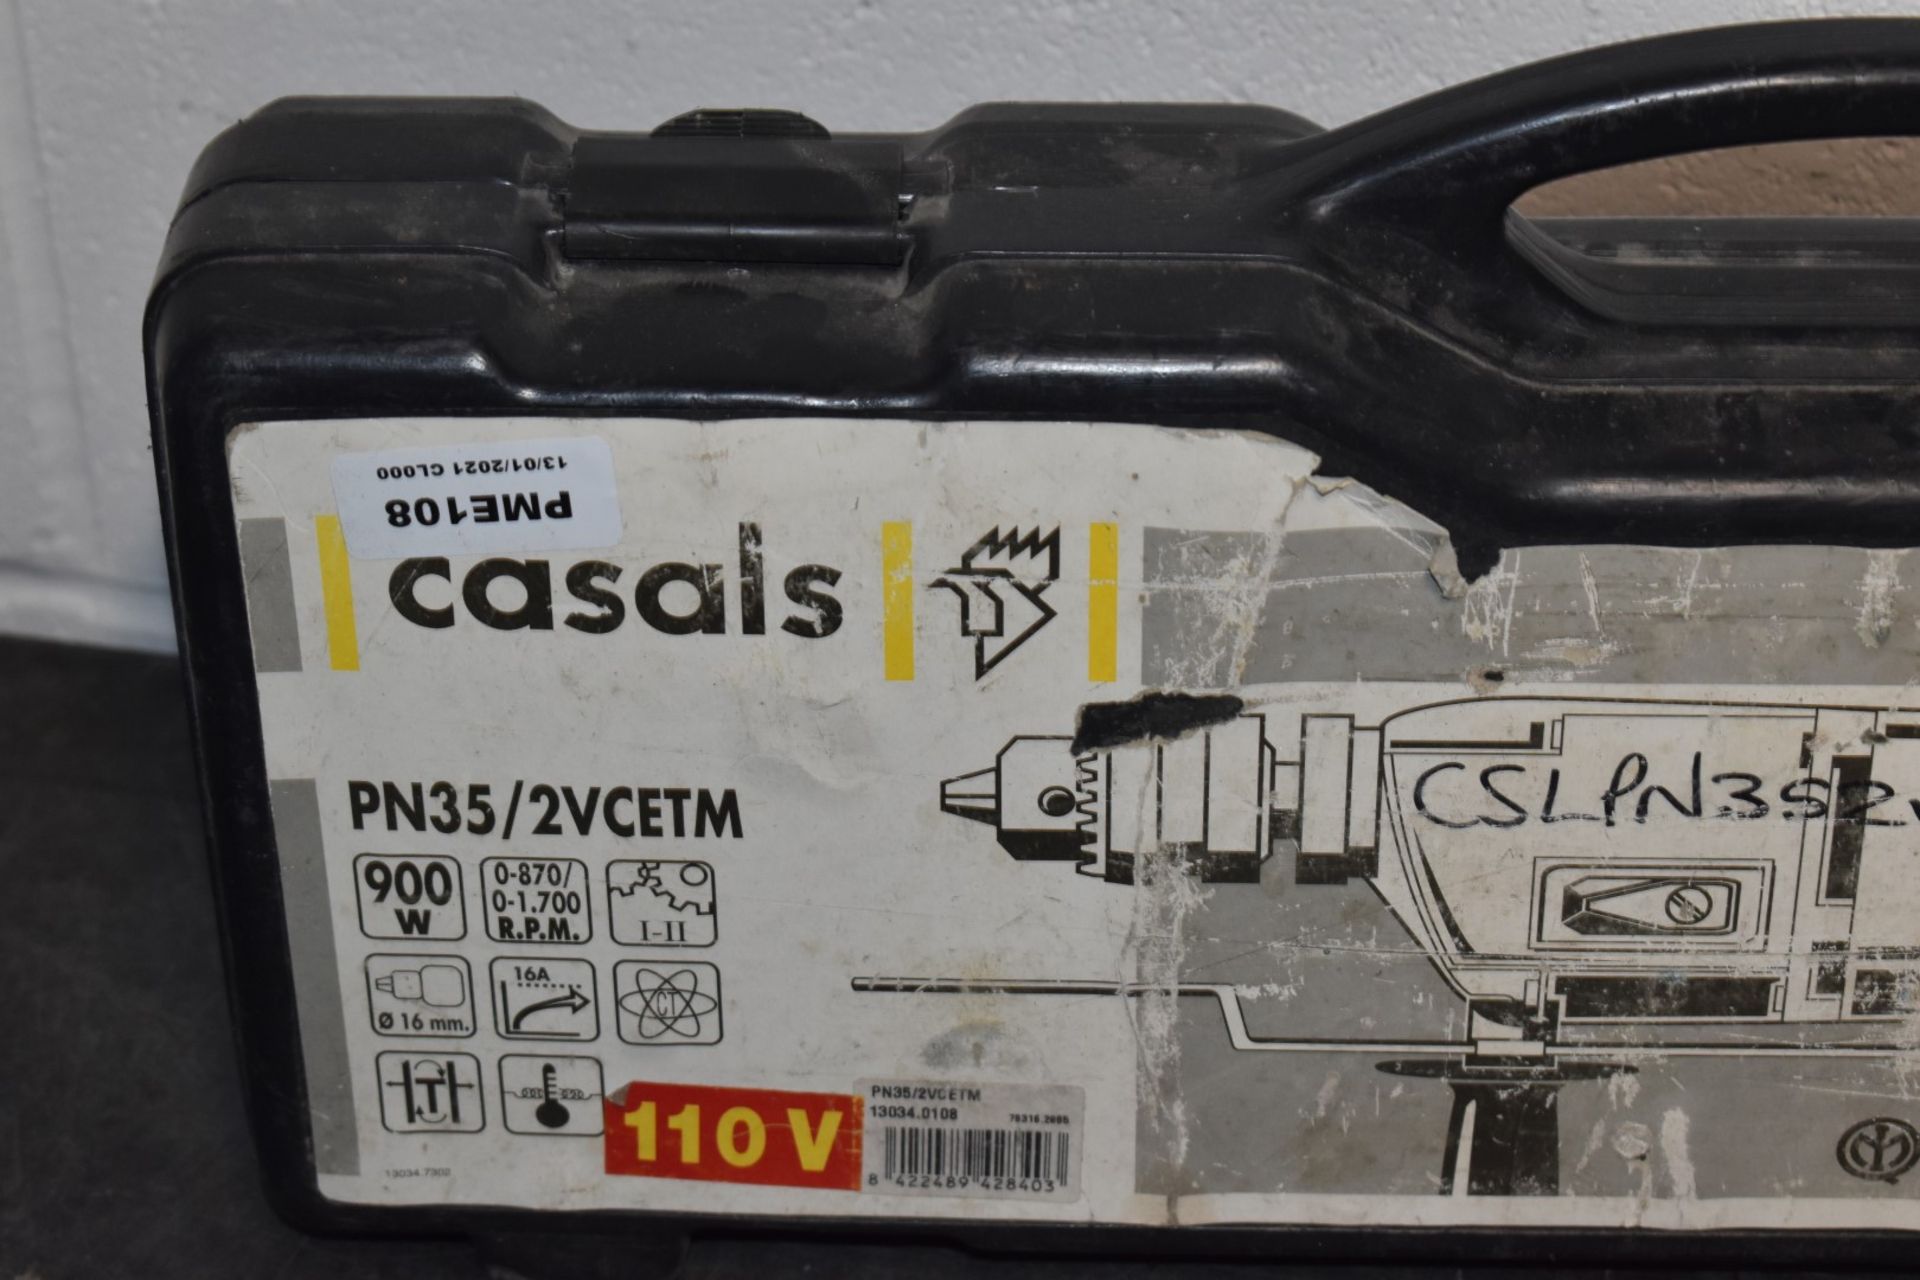 1 x Casals 110v Hammer Drill With Carry Case Model PN35/2VCETM 900w With 110v Site Plug - Image 5 of 5